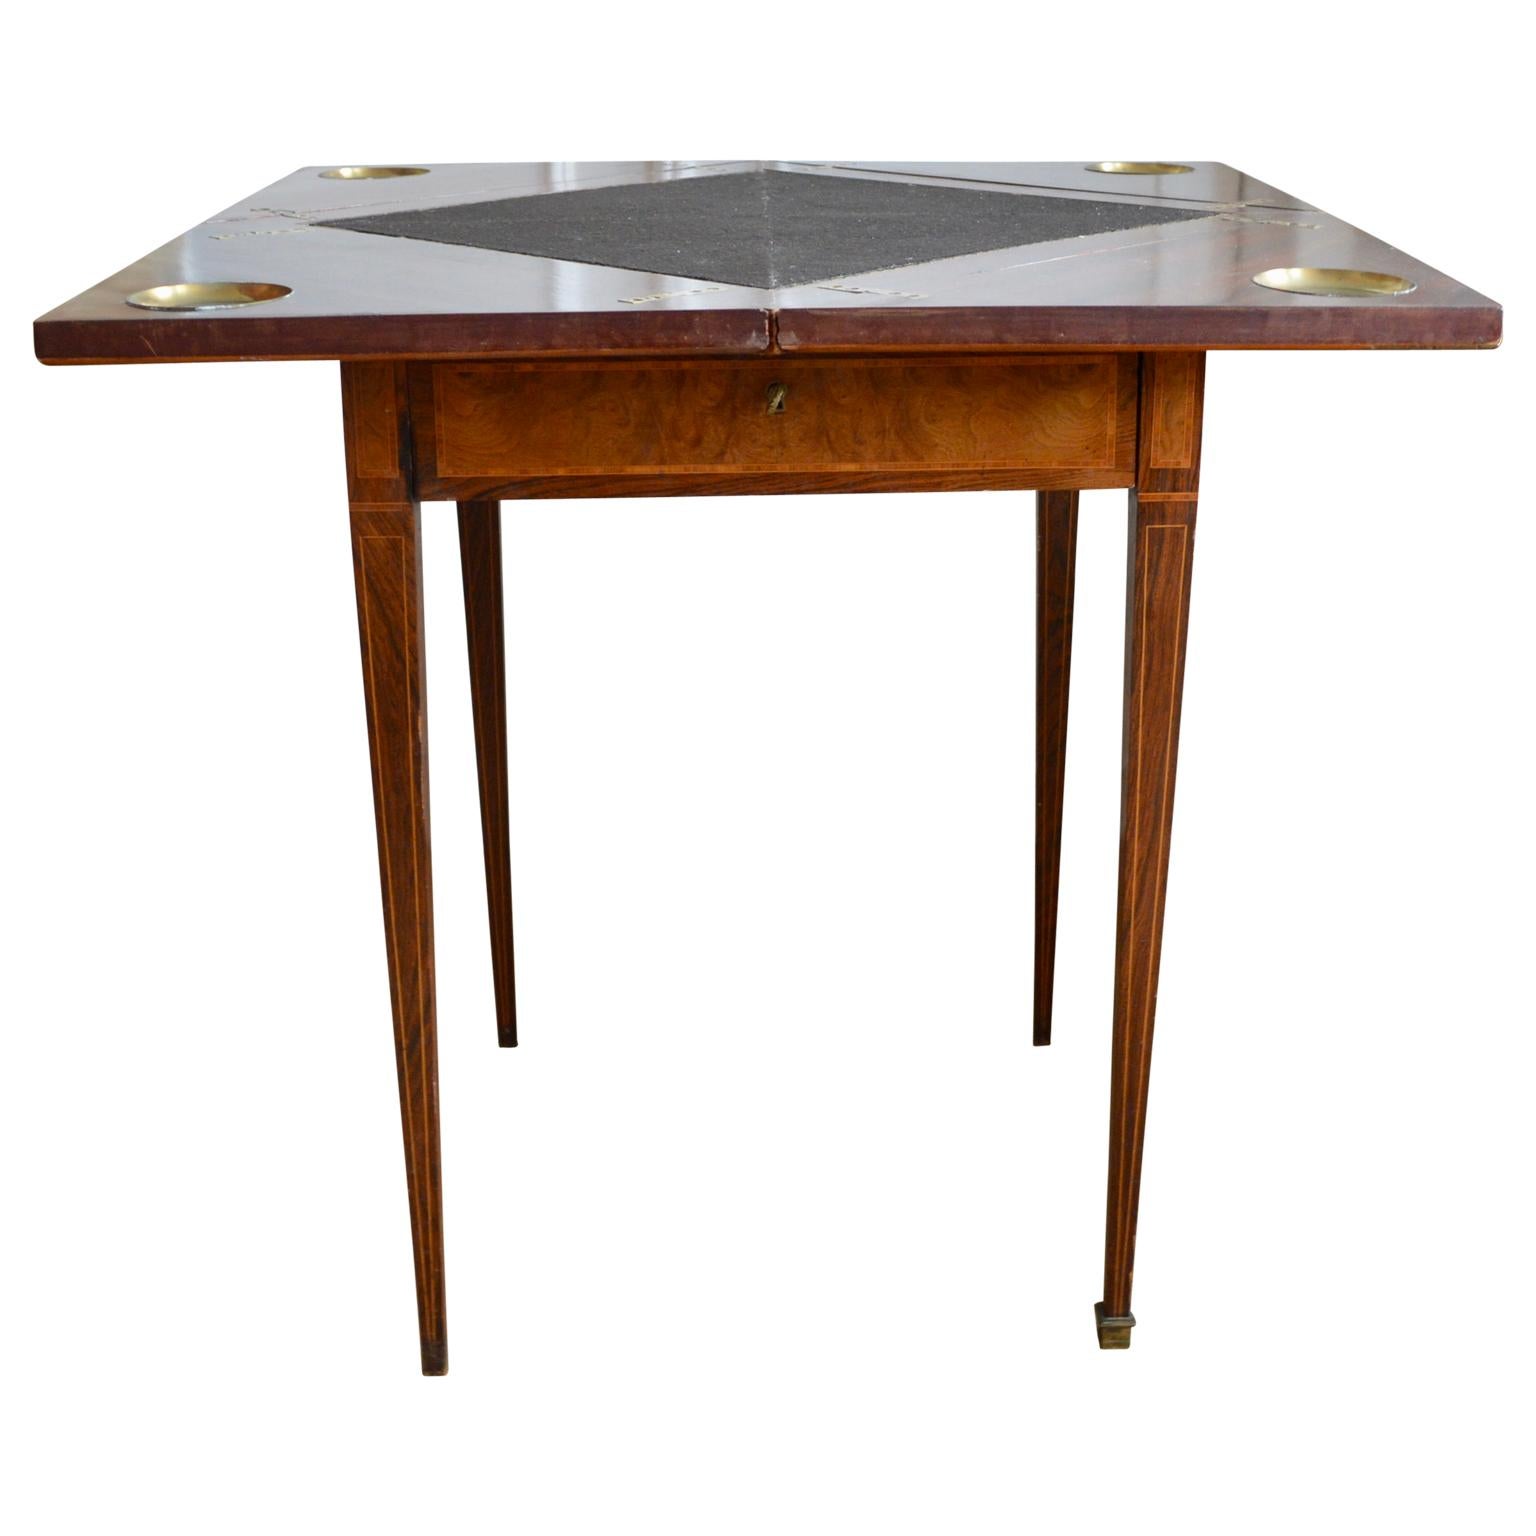 This Edwardian mahogany envelope card table, circa 1900 is a very unique design with a beautifully figured top with crosssbanded satinwood edge. The top swivels and four sections open up to reveal a black felt playing surface and four counter wells.